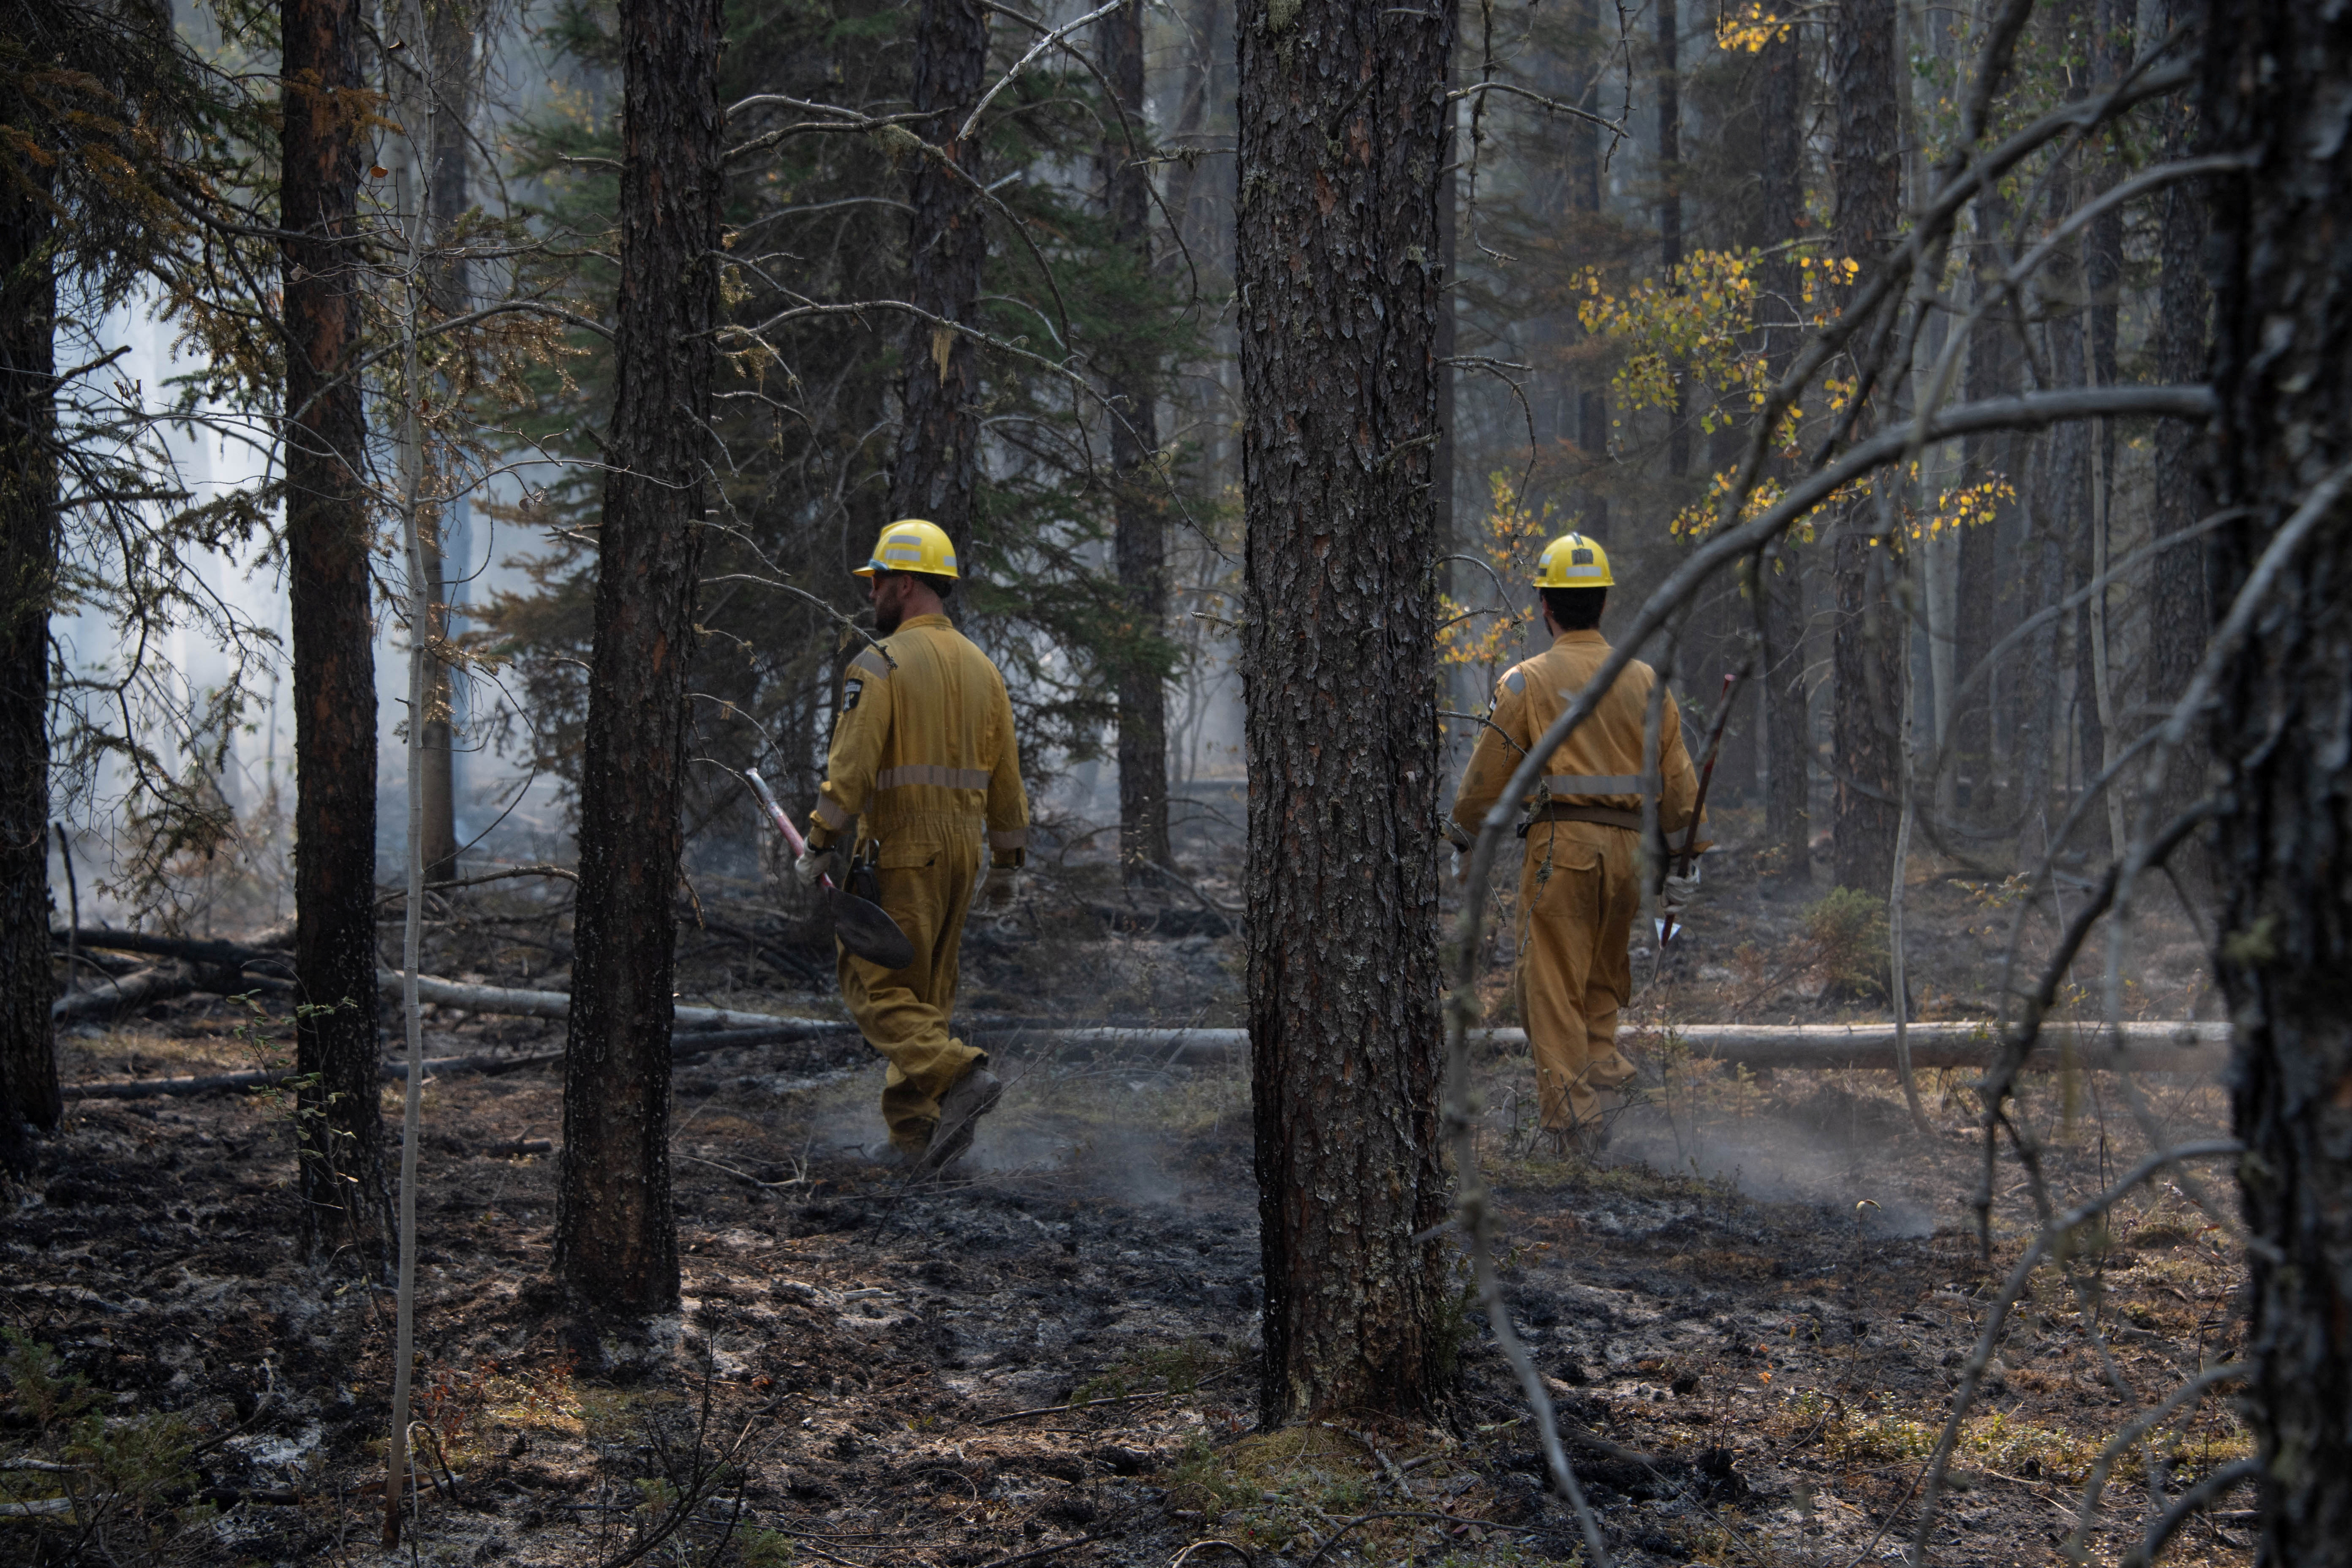 Members of B Company, 2nd Battalion, Royal 22e Regiment, conduct firefighting operations near Hay River